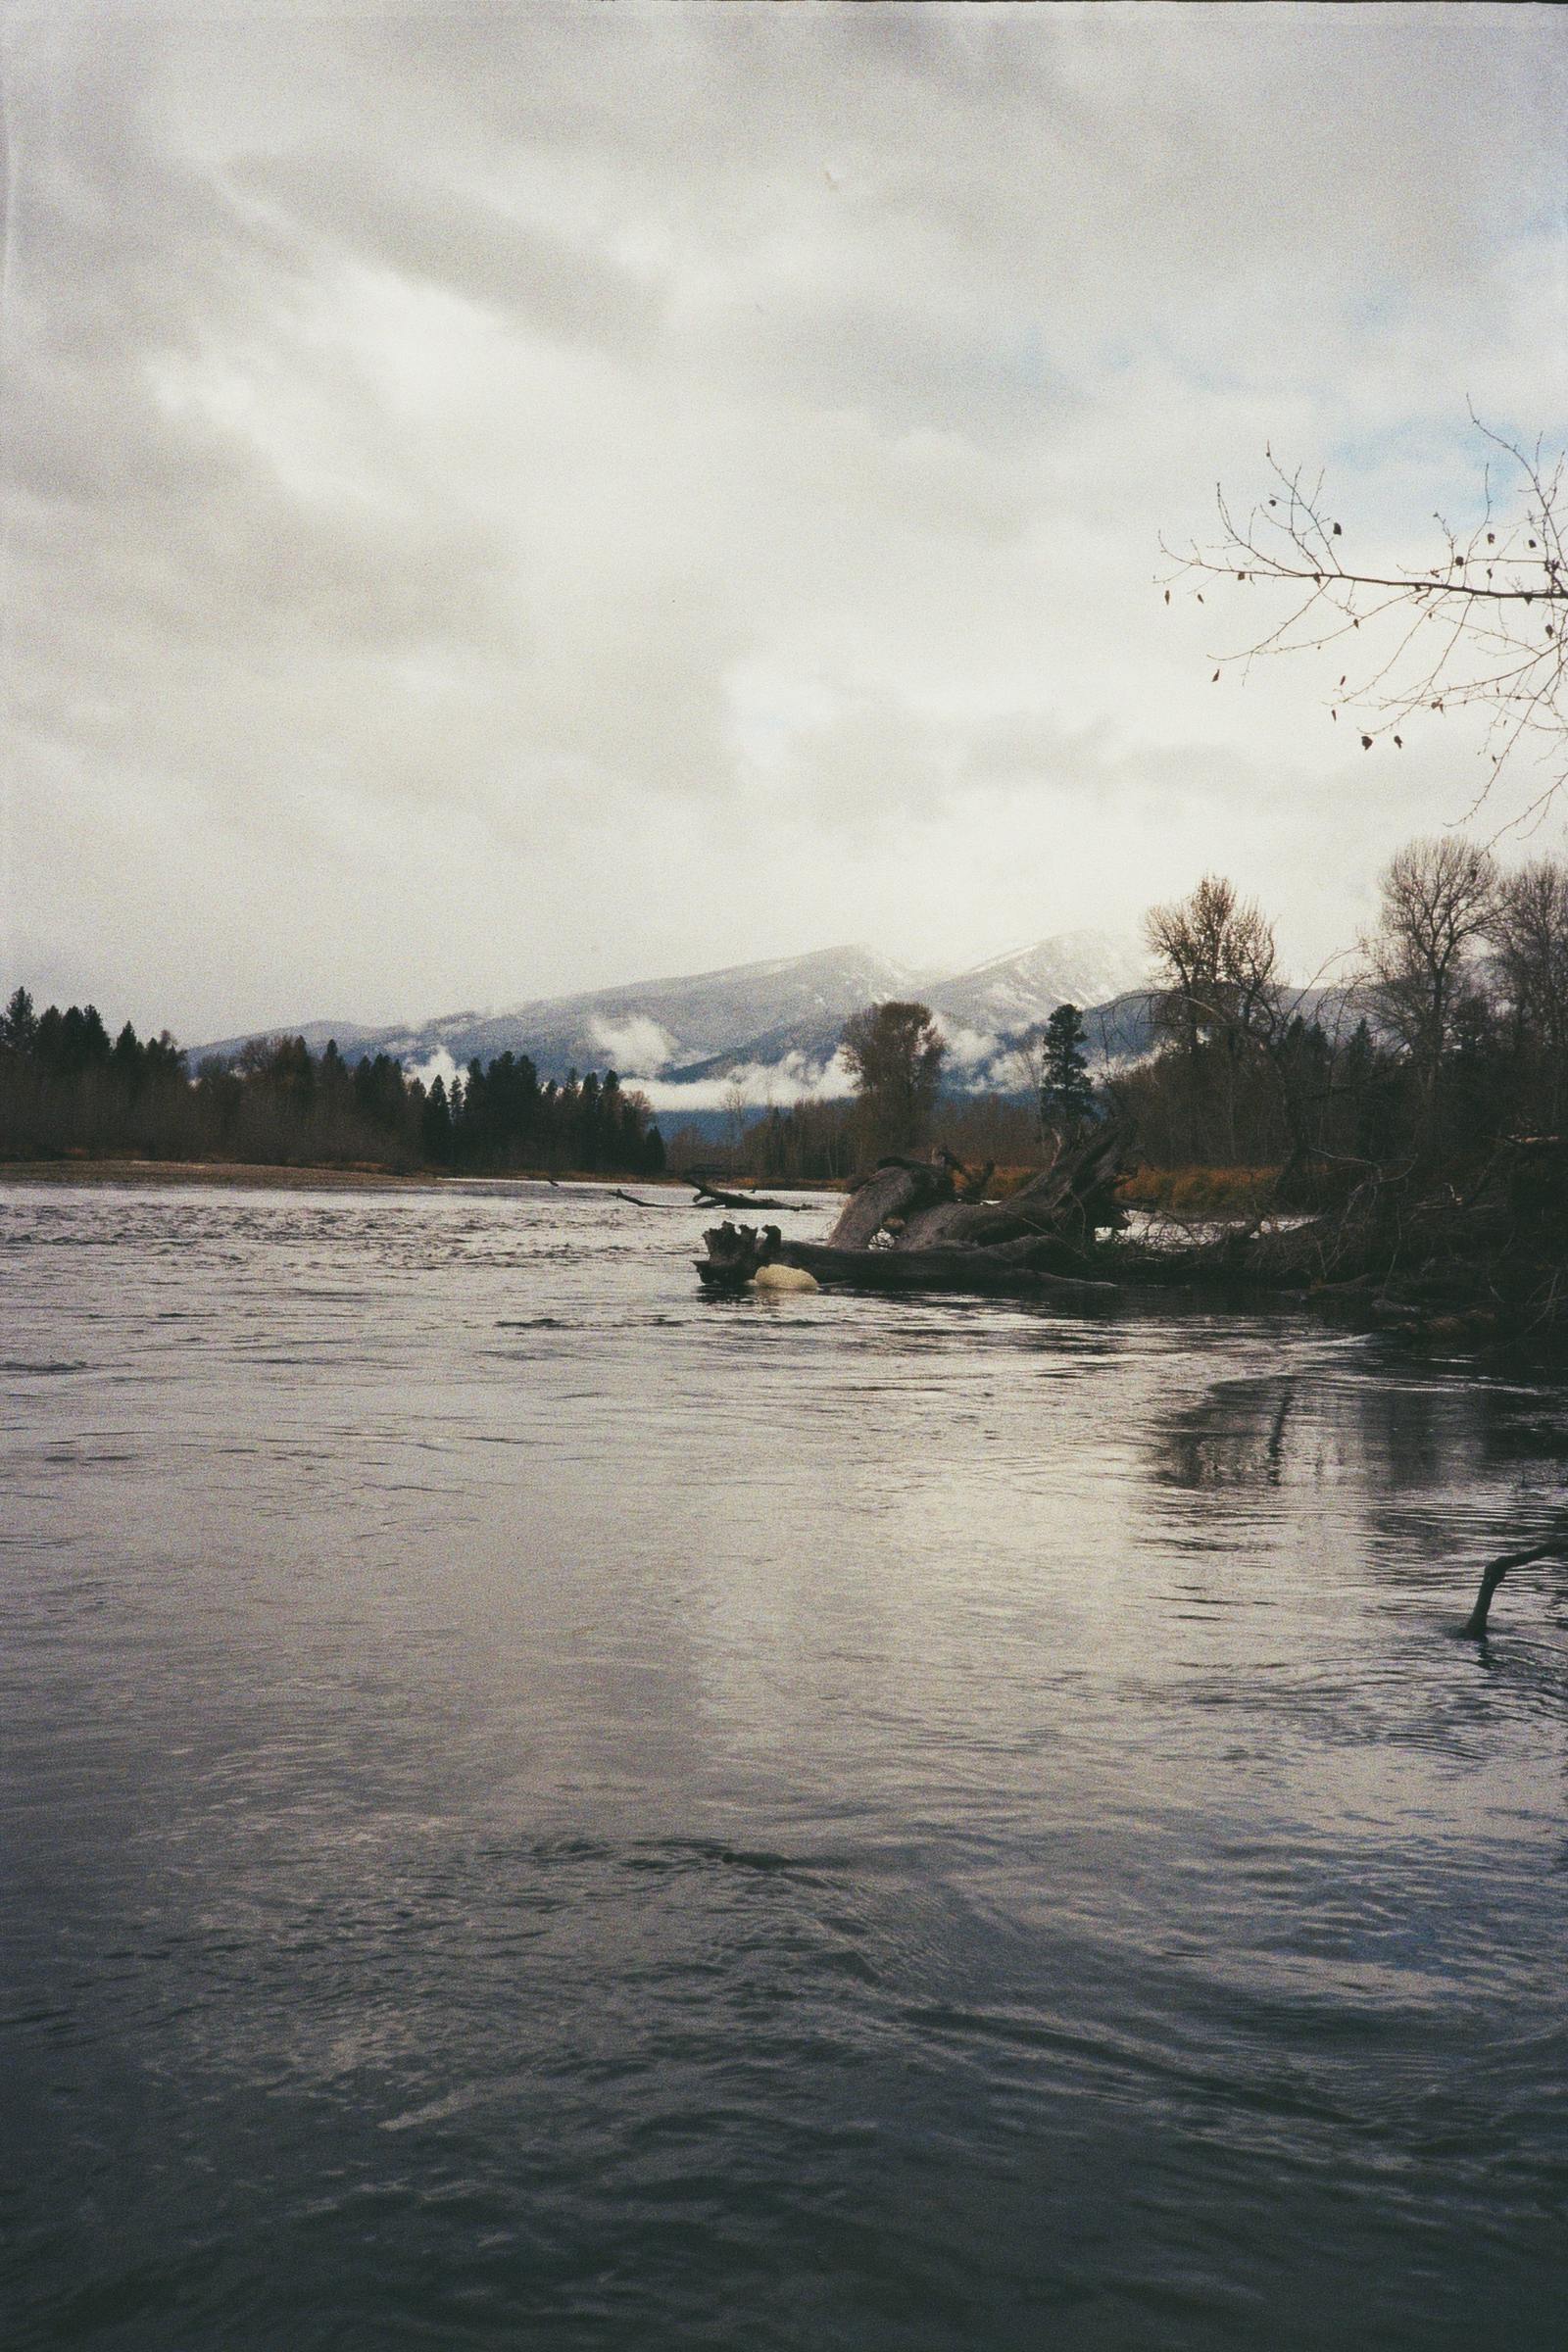 A peaceful, wintery river scene with mountains in the distance